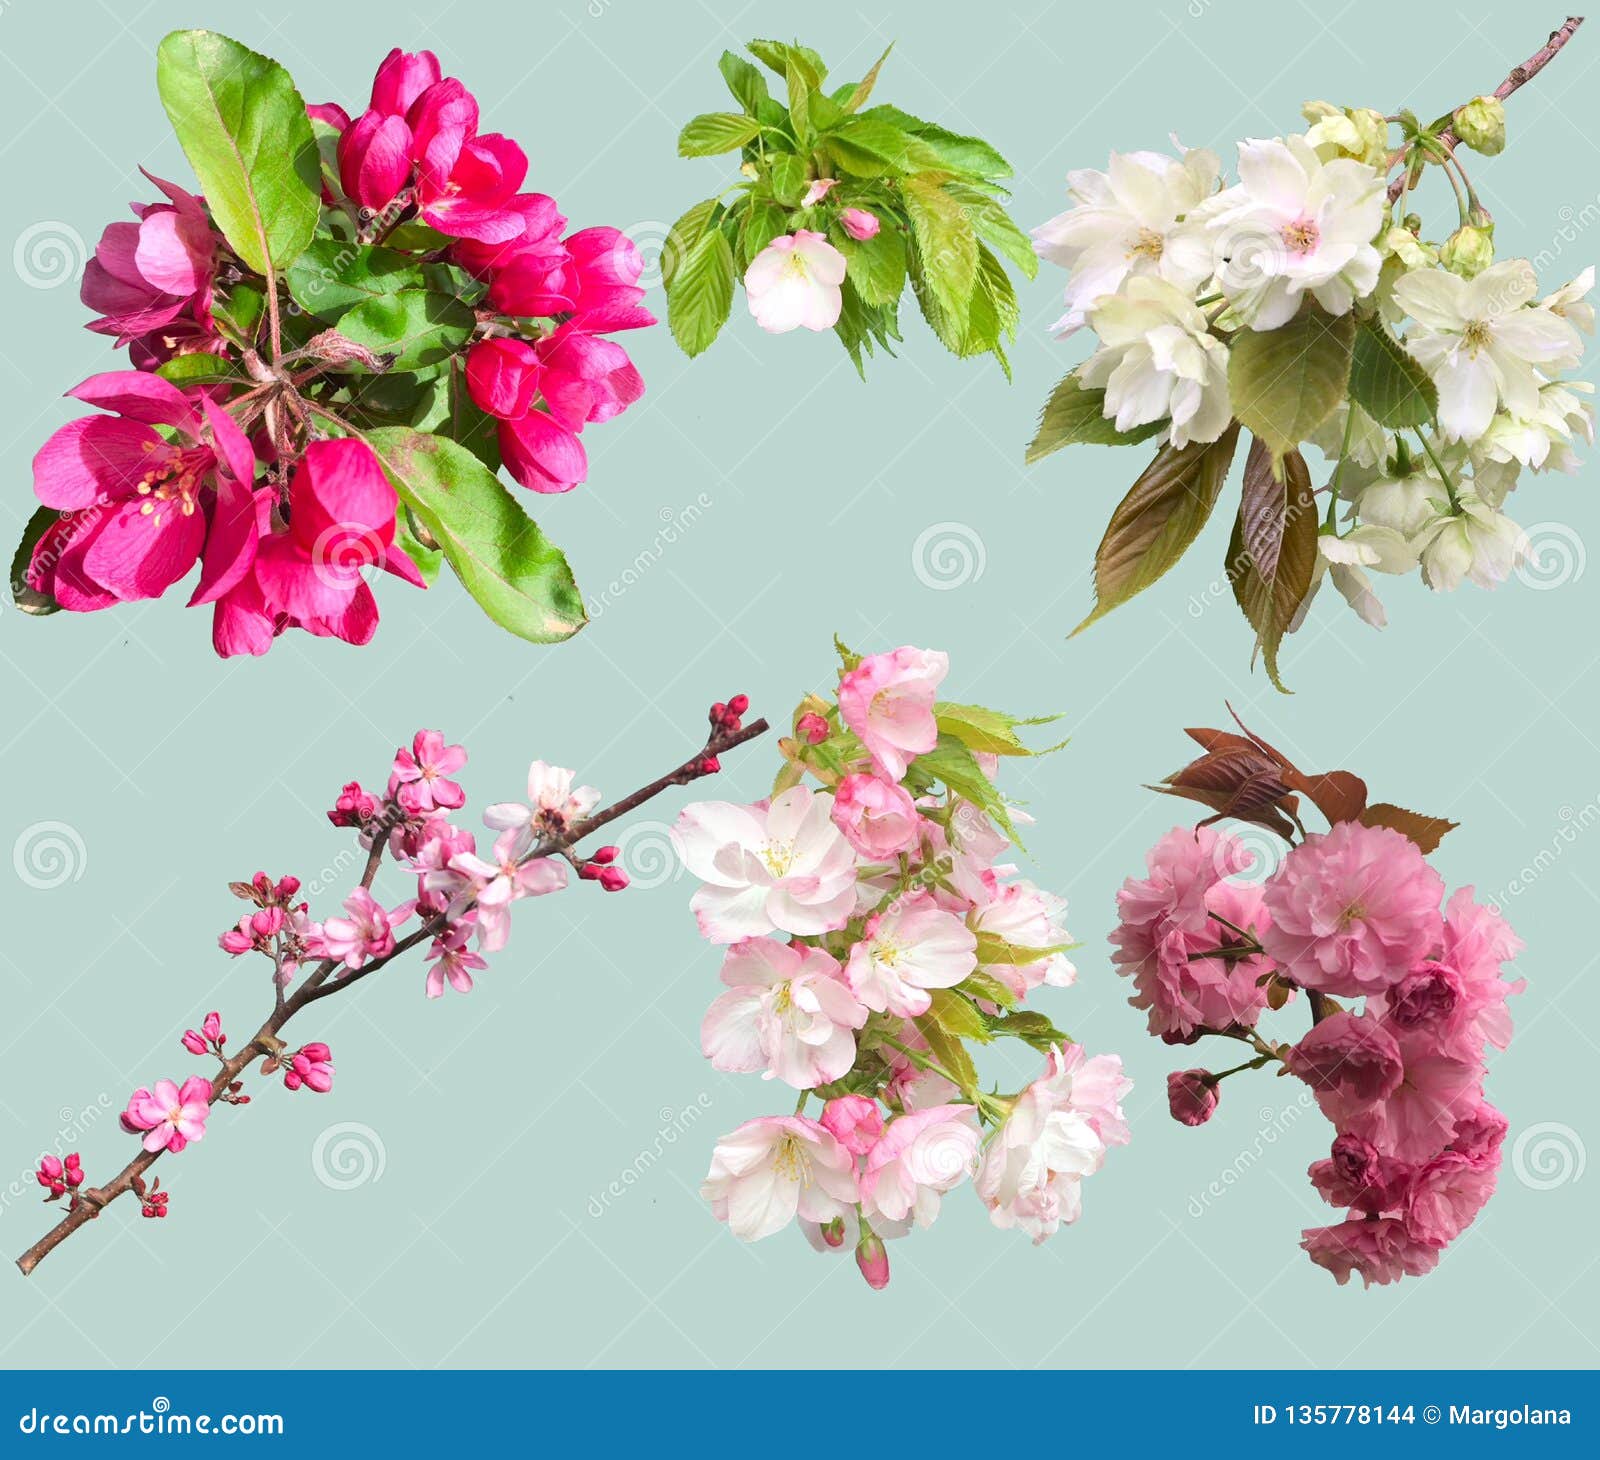 Blooming Garden Blossoms Of Collection Cherry And Apple Tree Stock Apple Blossom Tree Vs Cherry Blossom